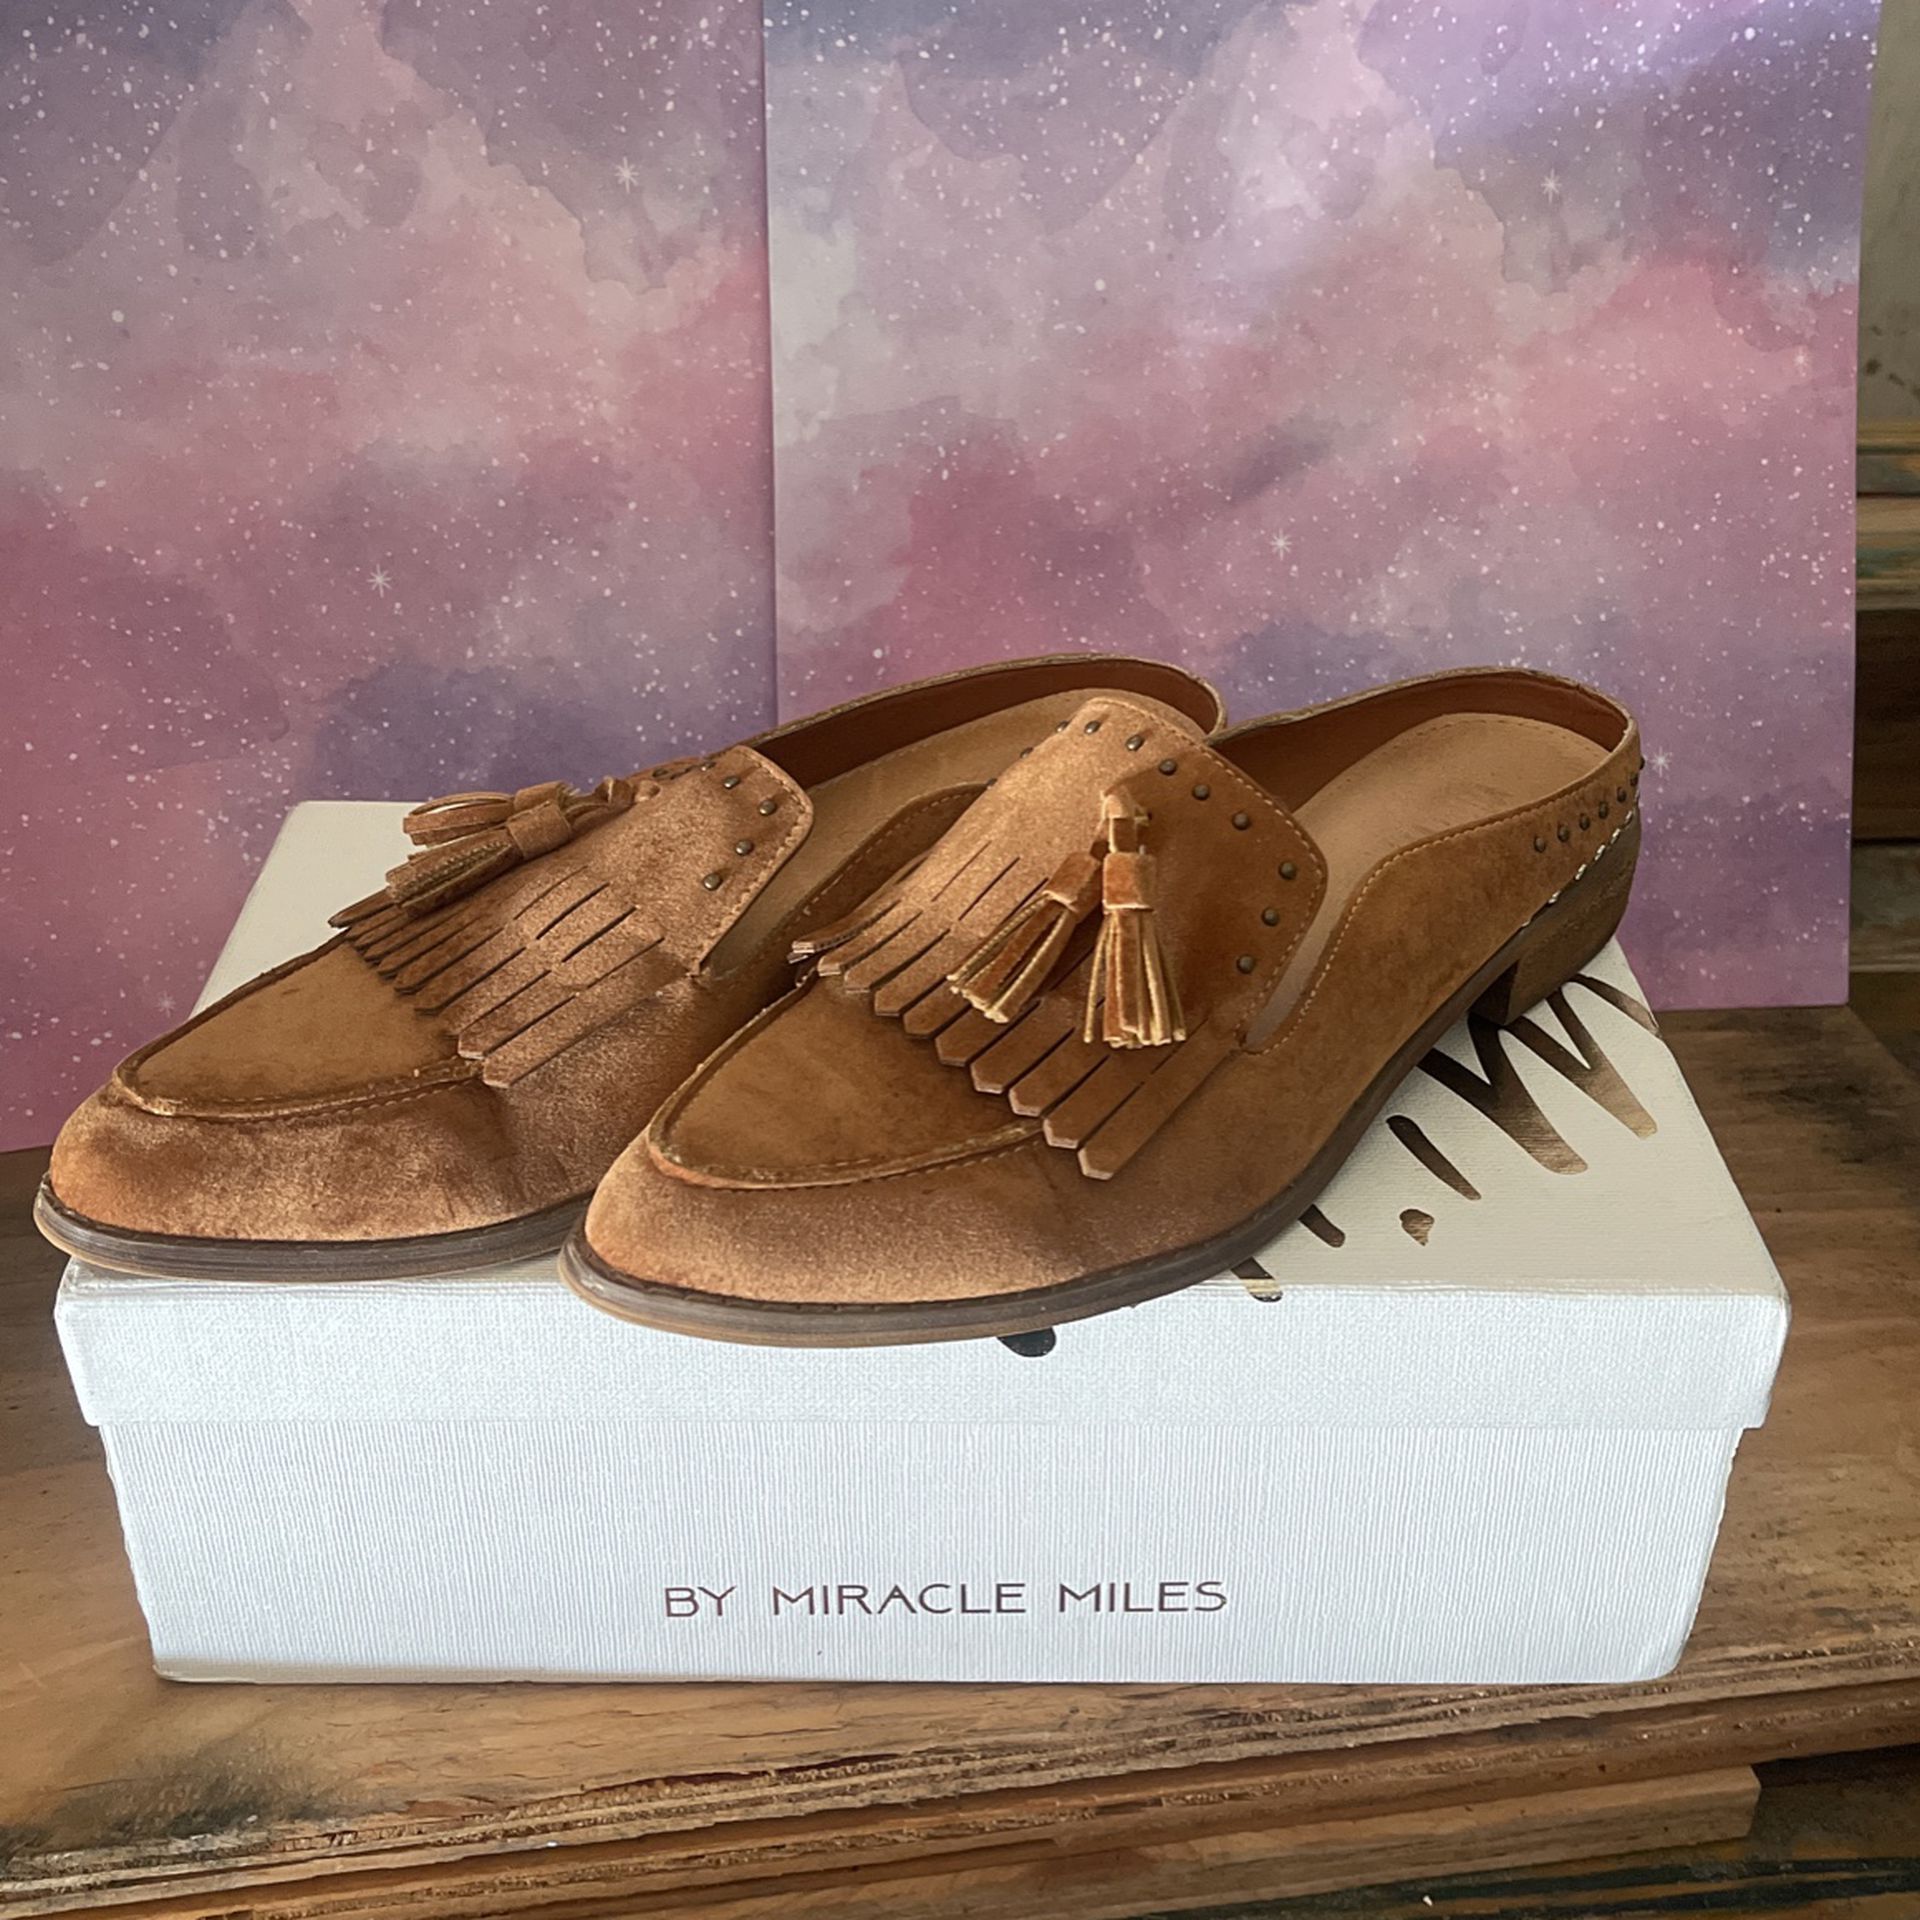 Womens classy https://offerup.com/redirect/?o=bWkuaW0= size 8 miracle miles loafers  mi i’m